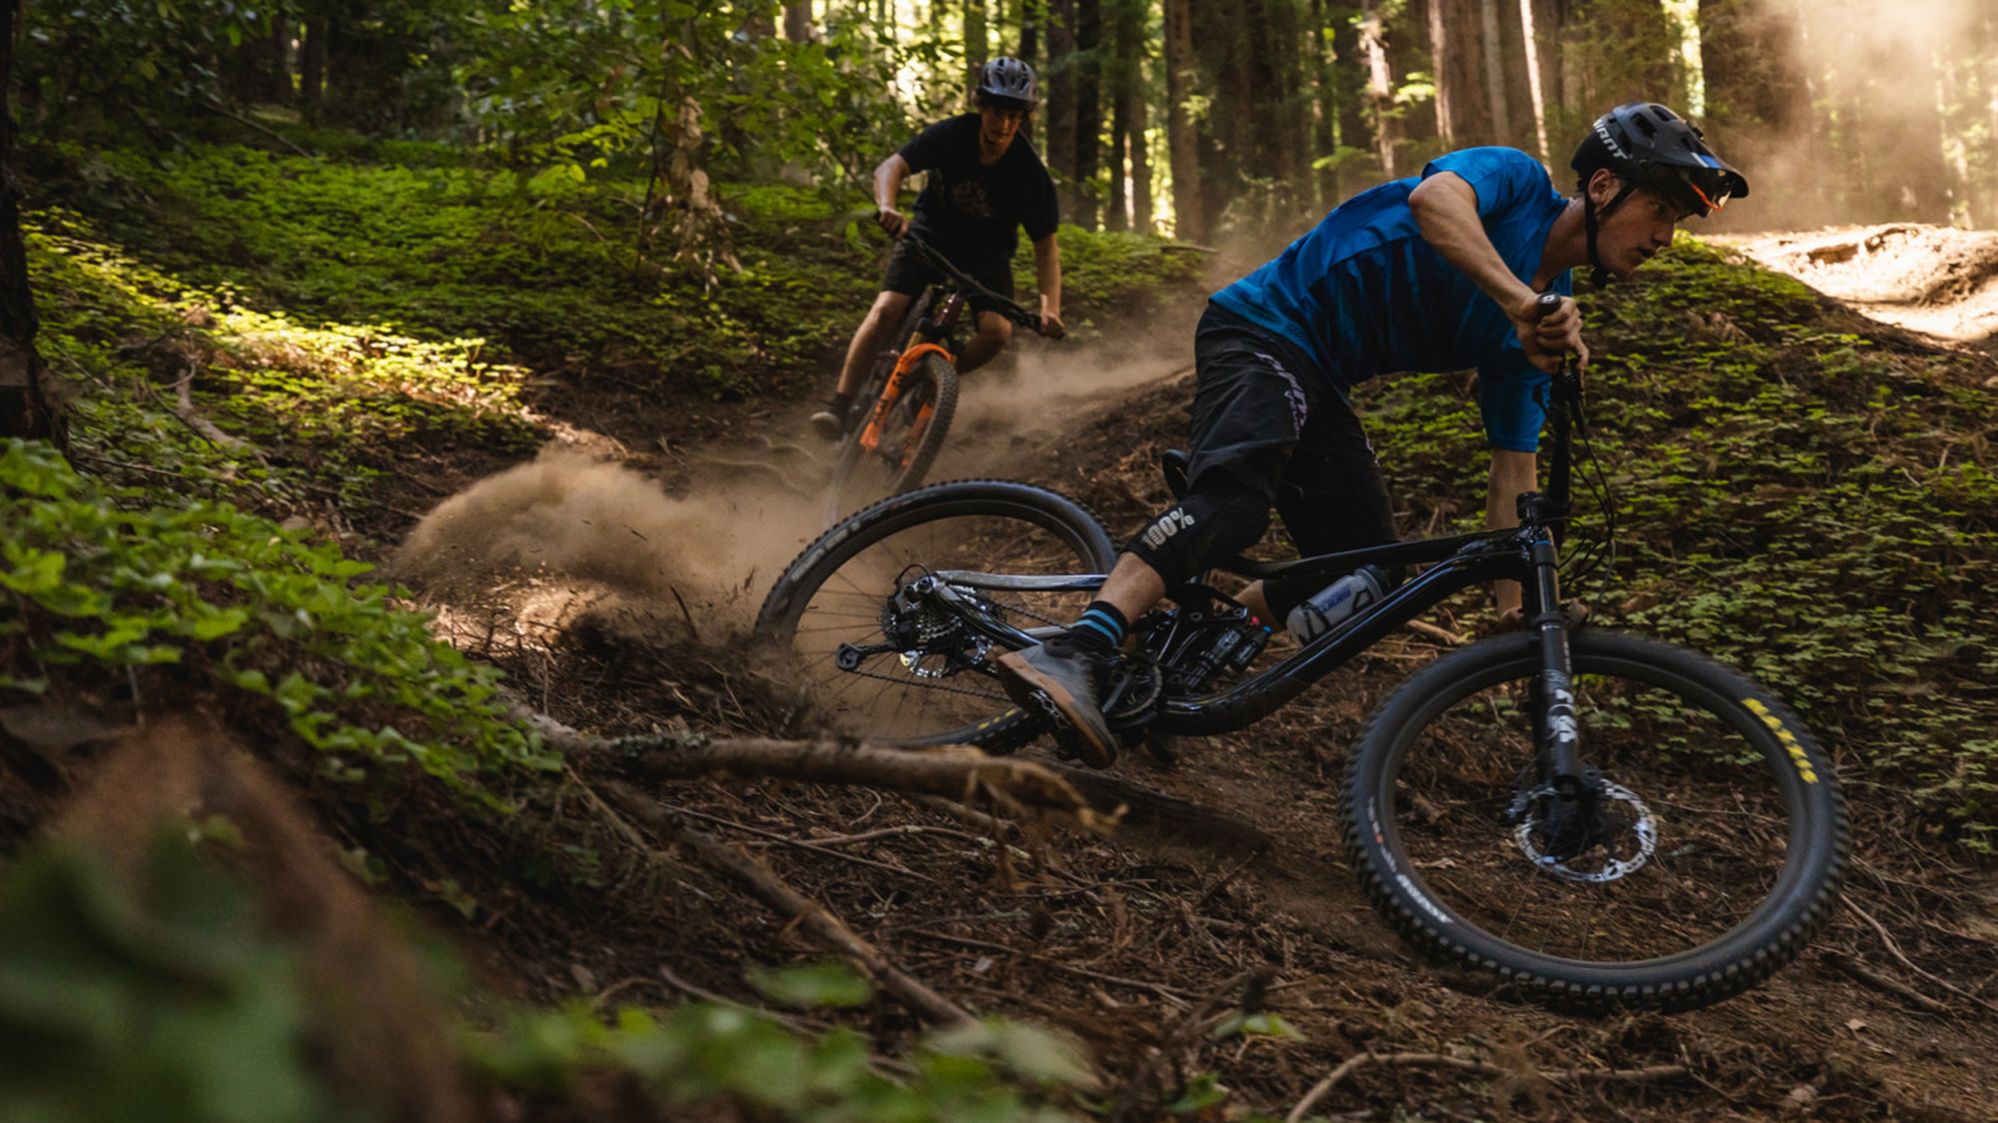 38 Essential mountain bike accessories and gear of 2023